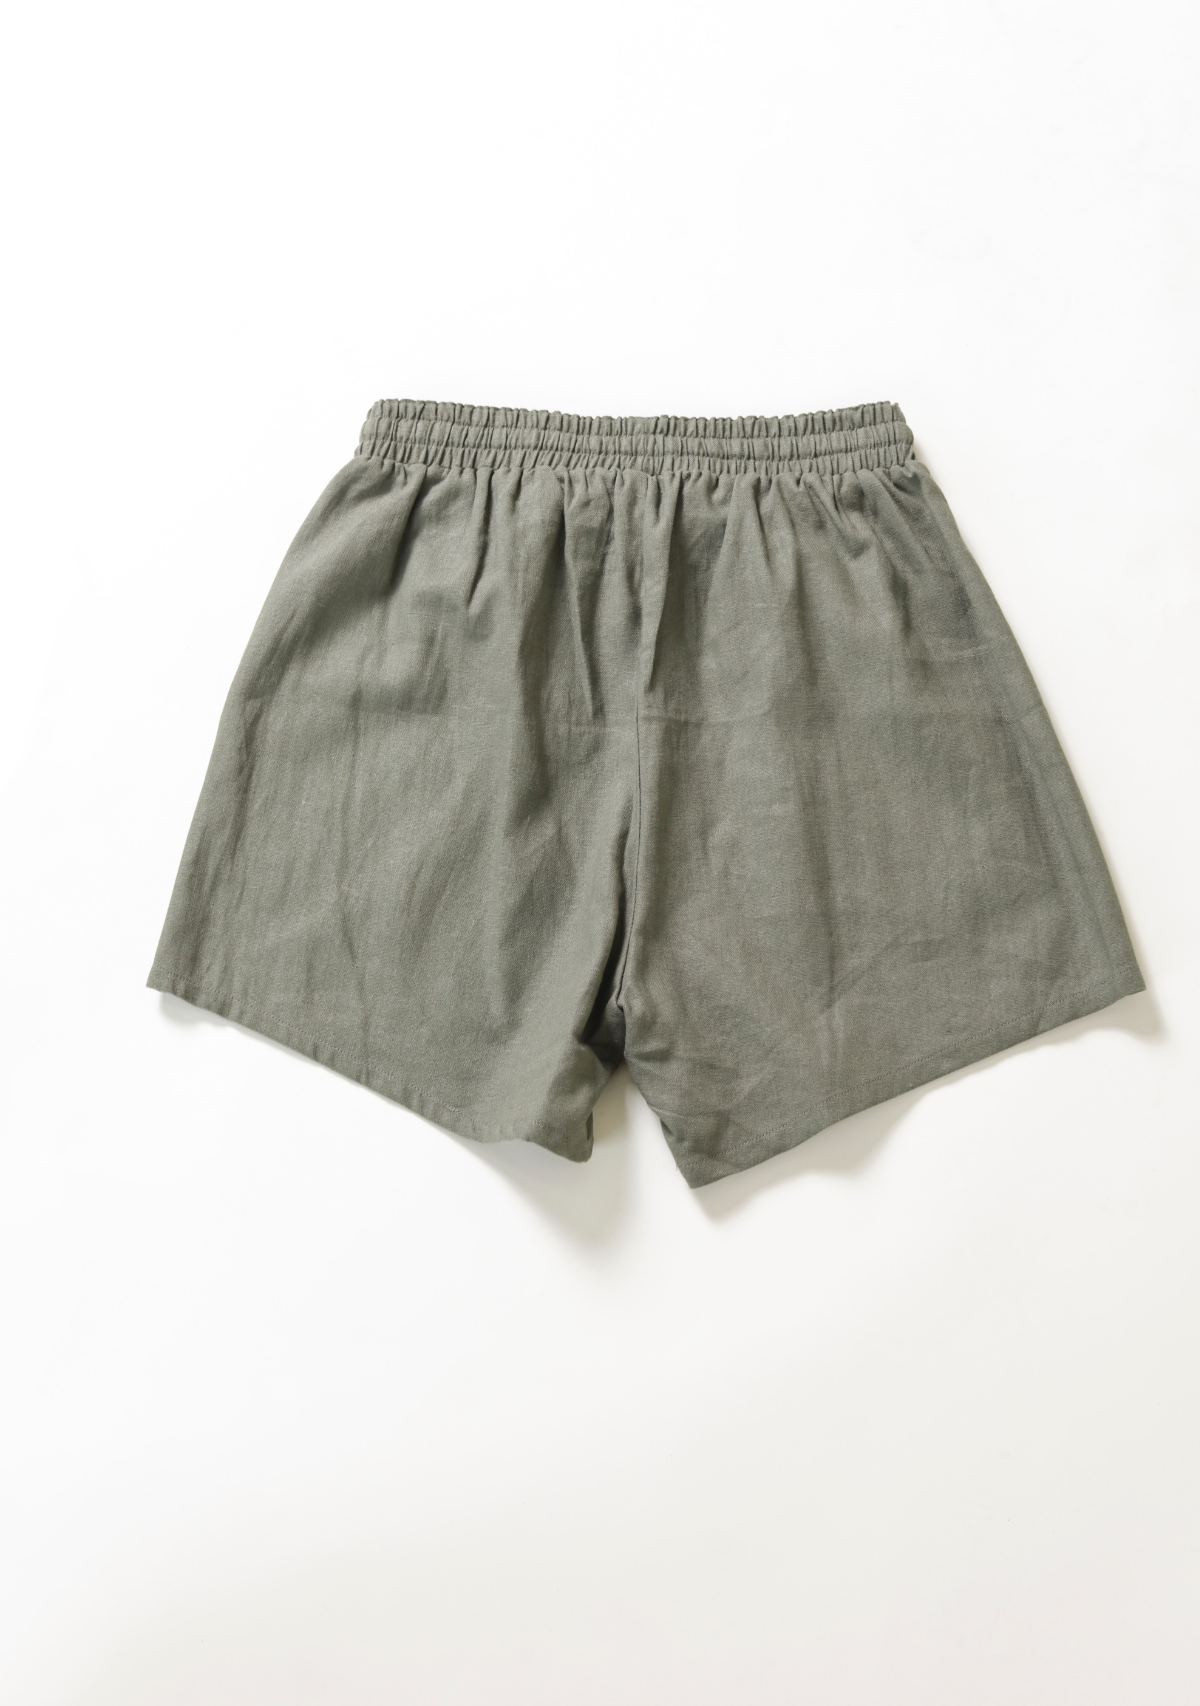 Women's cinched linen shorts with drawstring sizes XS-3X. Women's Linen Shirt and Shorts Set color black and olive